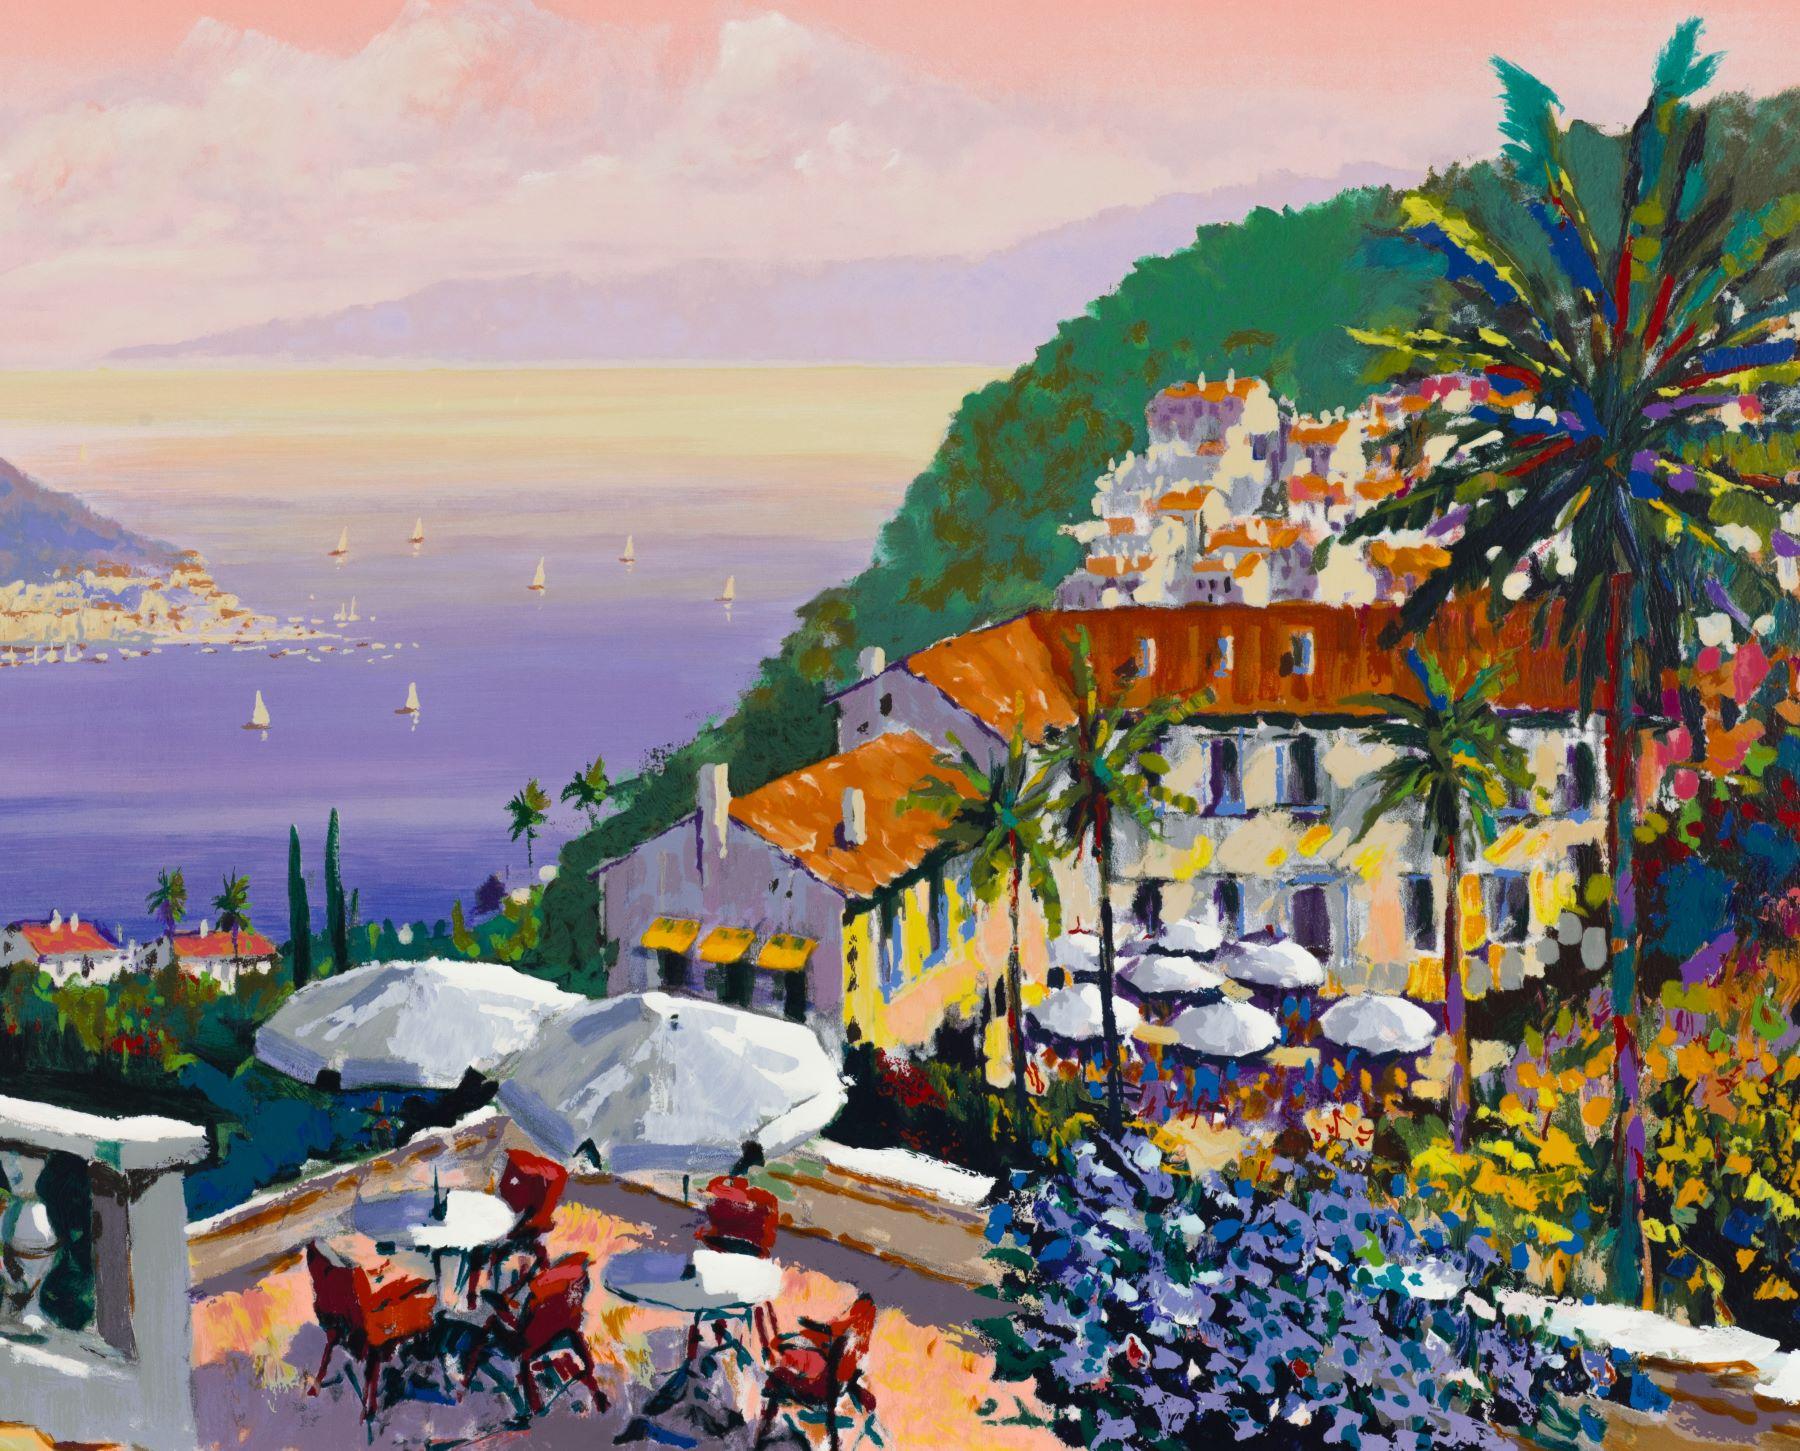 Crescent Bay is a serigraph on paper, image size 25 x 50 inches, signed ‘Kerry Hallam’ lower right and numbered lower left. From the edition of 500, numbered CXXVII/CL (there were also 175 Arabic, 25 APs and 150 on canvas), and framed in a classic,